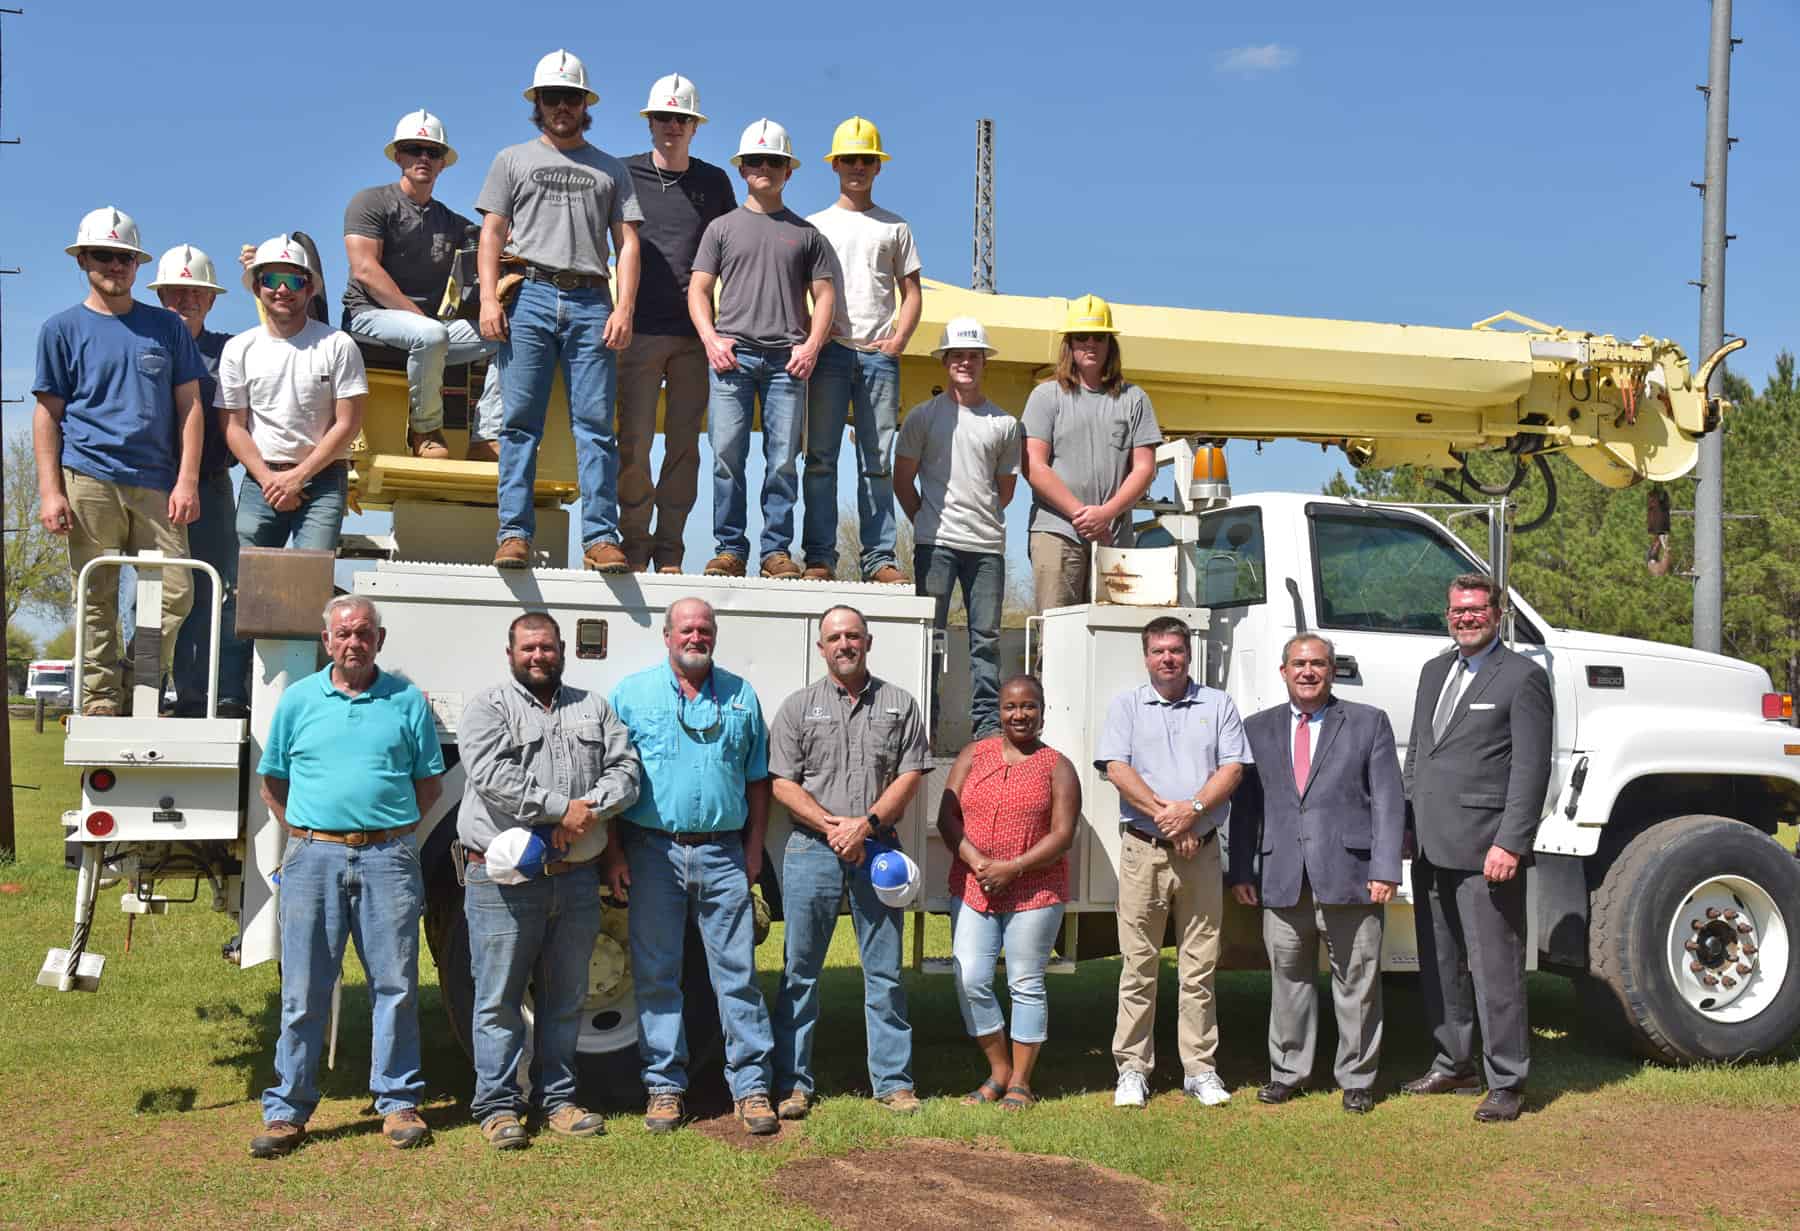 The Crisp County Power Commission donated a 2000 GMC 8500 Digger Derrick truck to the South Georgia Technical College Foundation recently to be used in the college’s Electrical Lineworker program. Shown above (l to r) in front of the truck are: SGTC Electrical Lineworker Instructor Dewey Turner, Crisp County Power Commission Mechanic Trey McBryant, SGTC Instructor Harold Ergle, Crisp County Power’s Manager of Operations Blake Manning, Director of HR Ladreka Daniels, and Chairman Ray Hughes with SGTC President Dr. John Watford and SGTC Economic Development Business and Industry Director Paul Farr. Members of the 2022 Electrical Lineworker program are also shown on the truck.